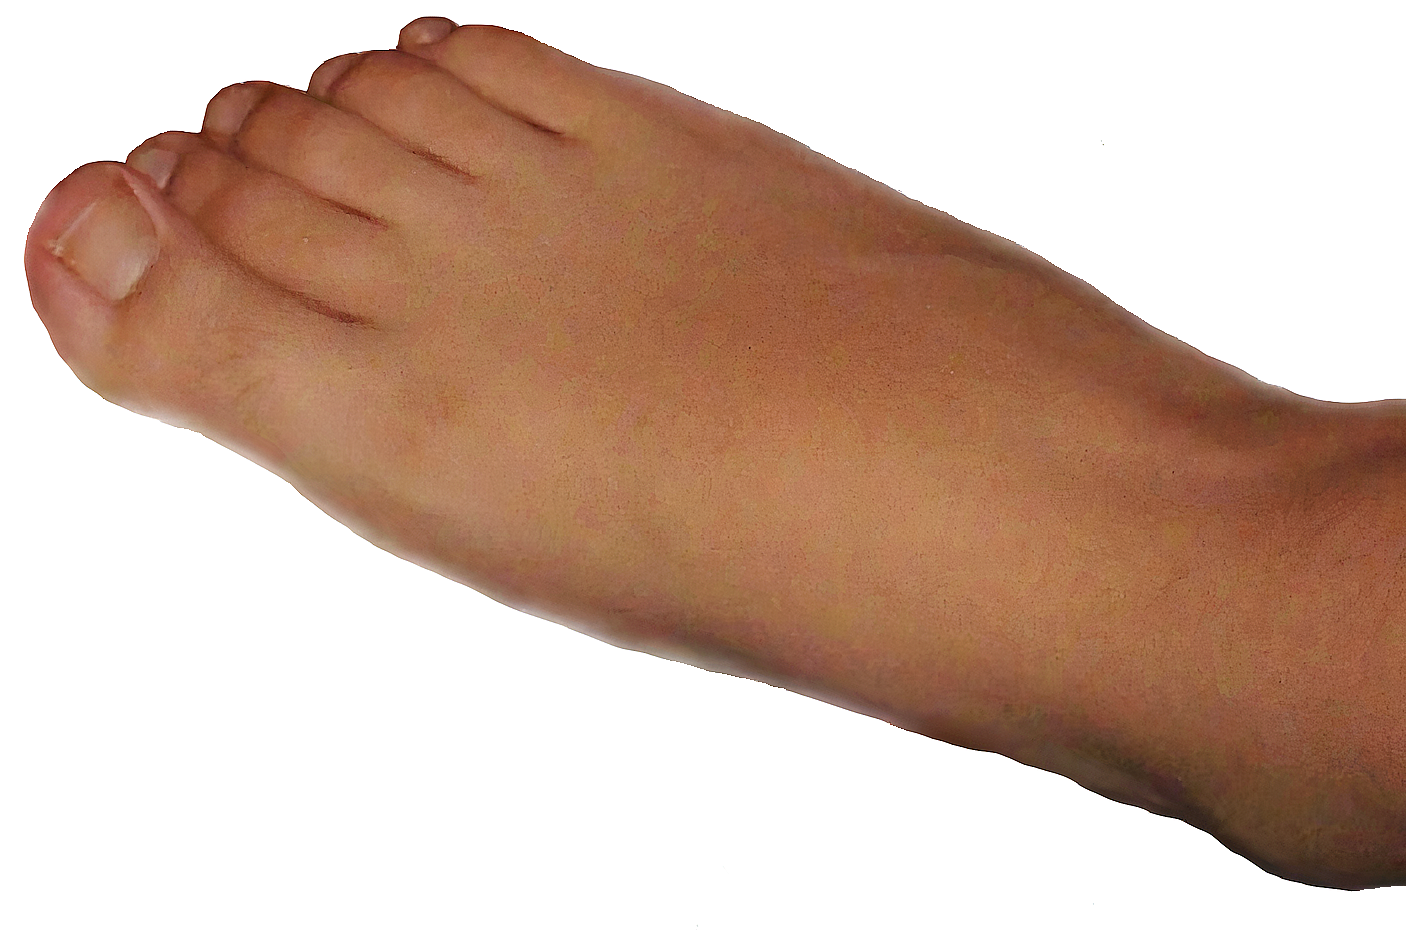 File:Soles of Feet.png - Wikipedia